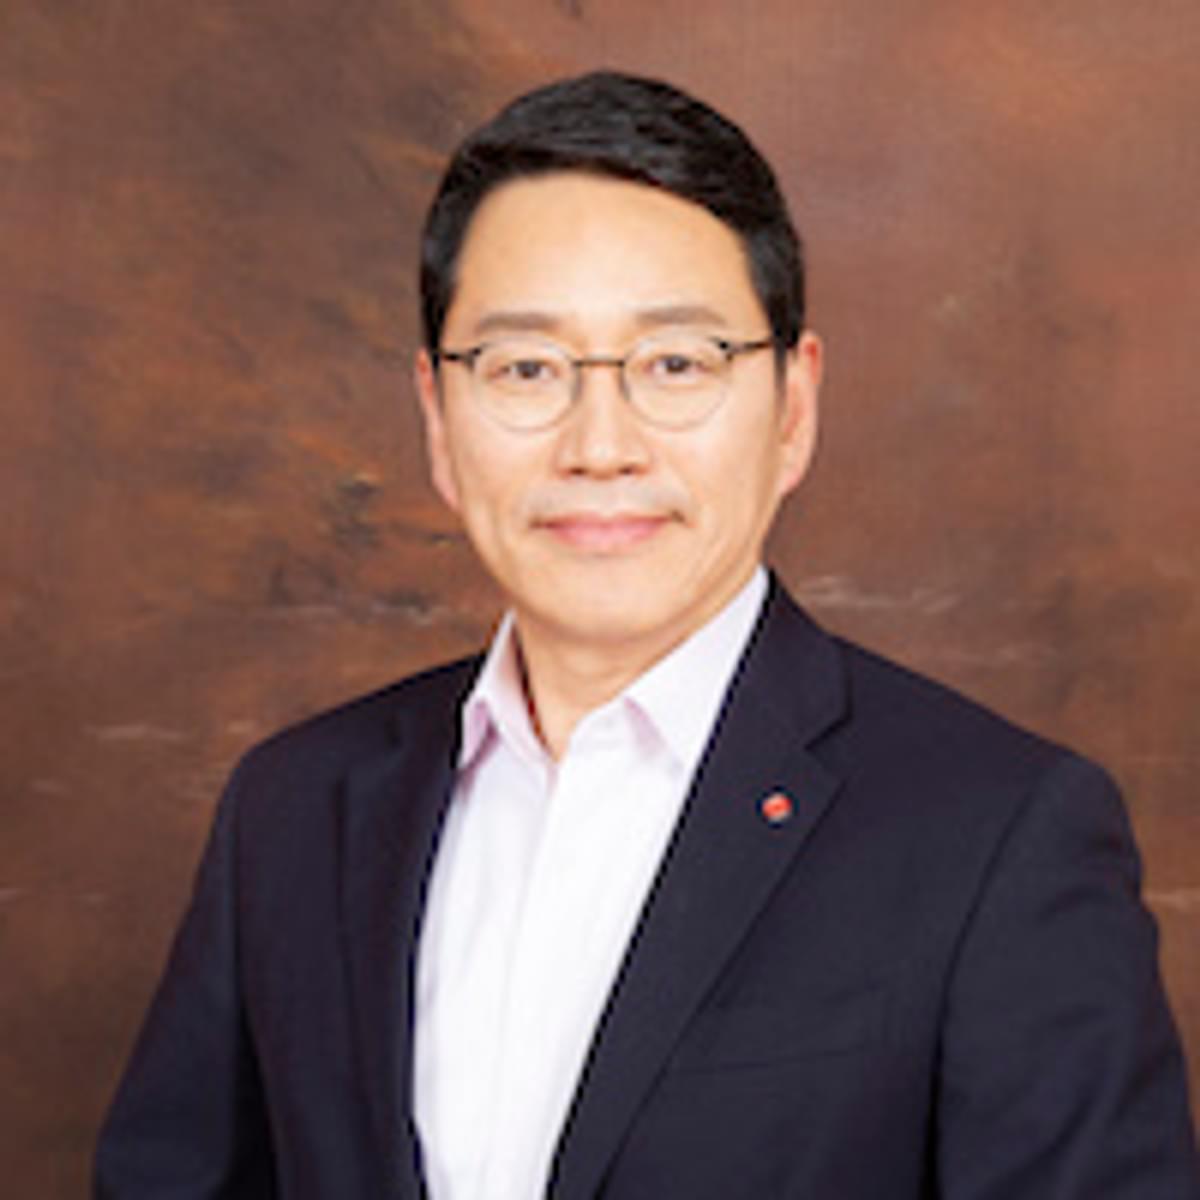 LG Electronics benoemt William Cho tot CEO image